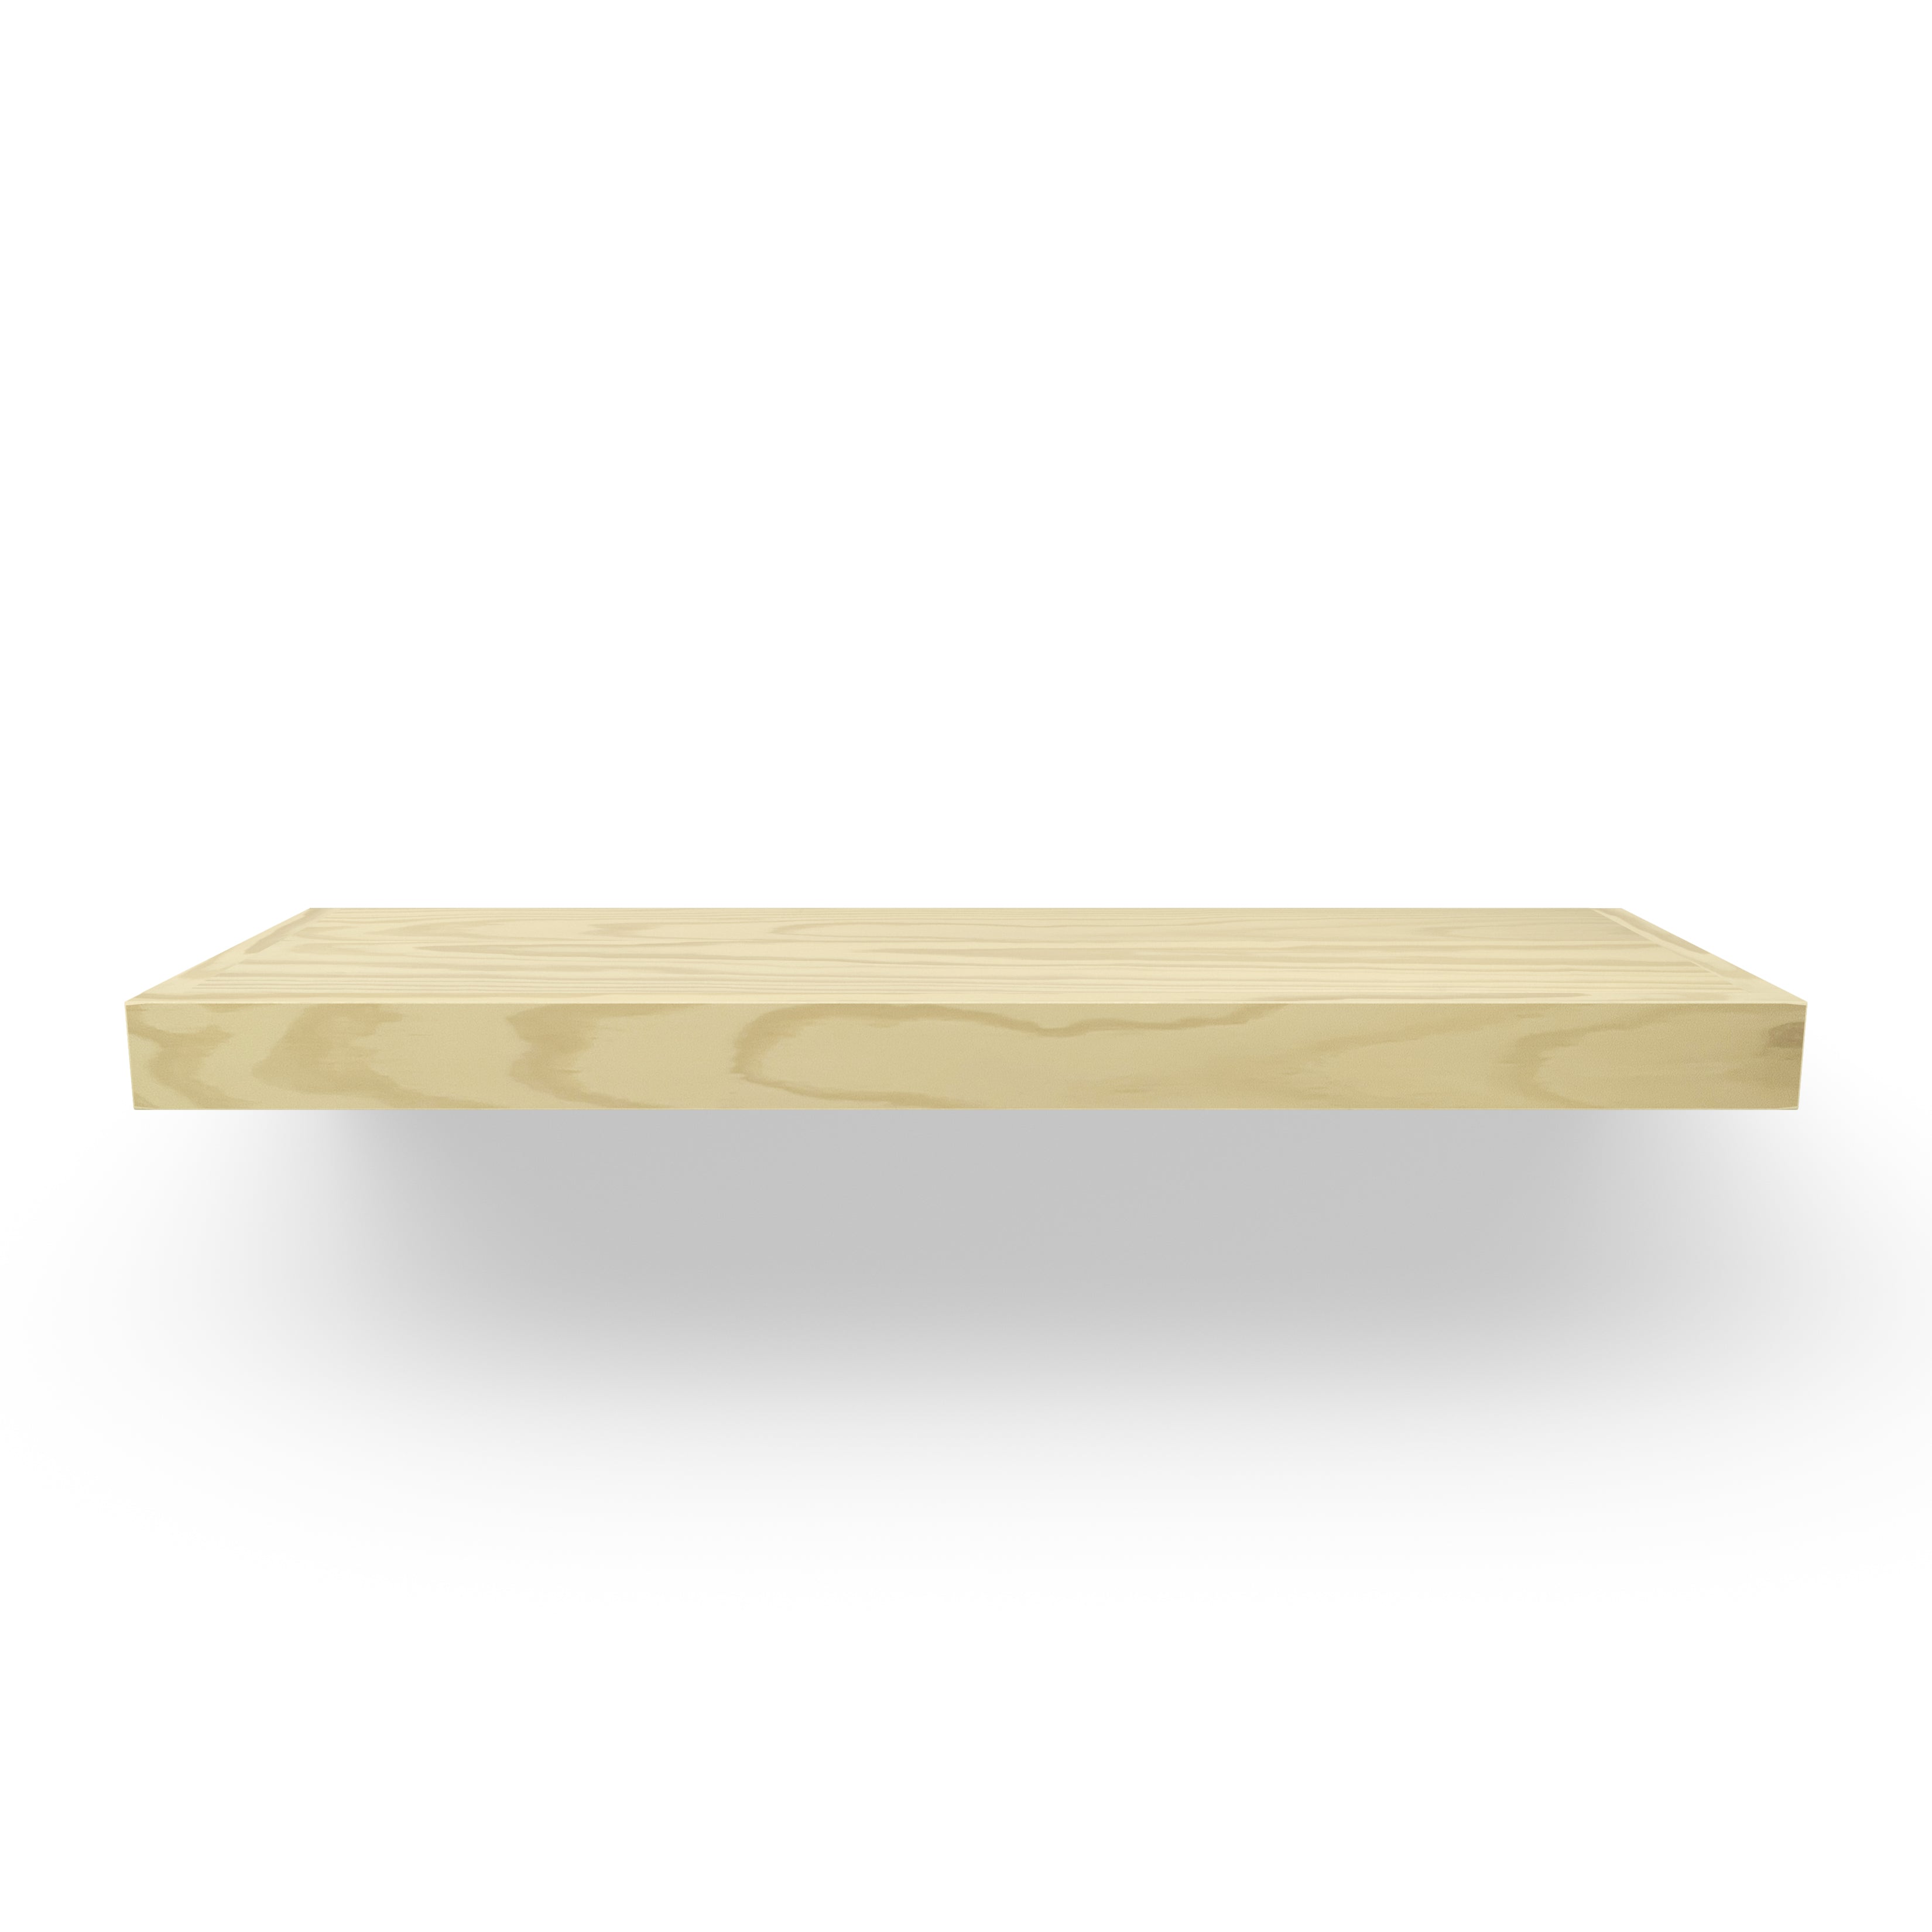 Pine 2 Inch Thick Floating Shelf